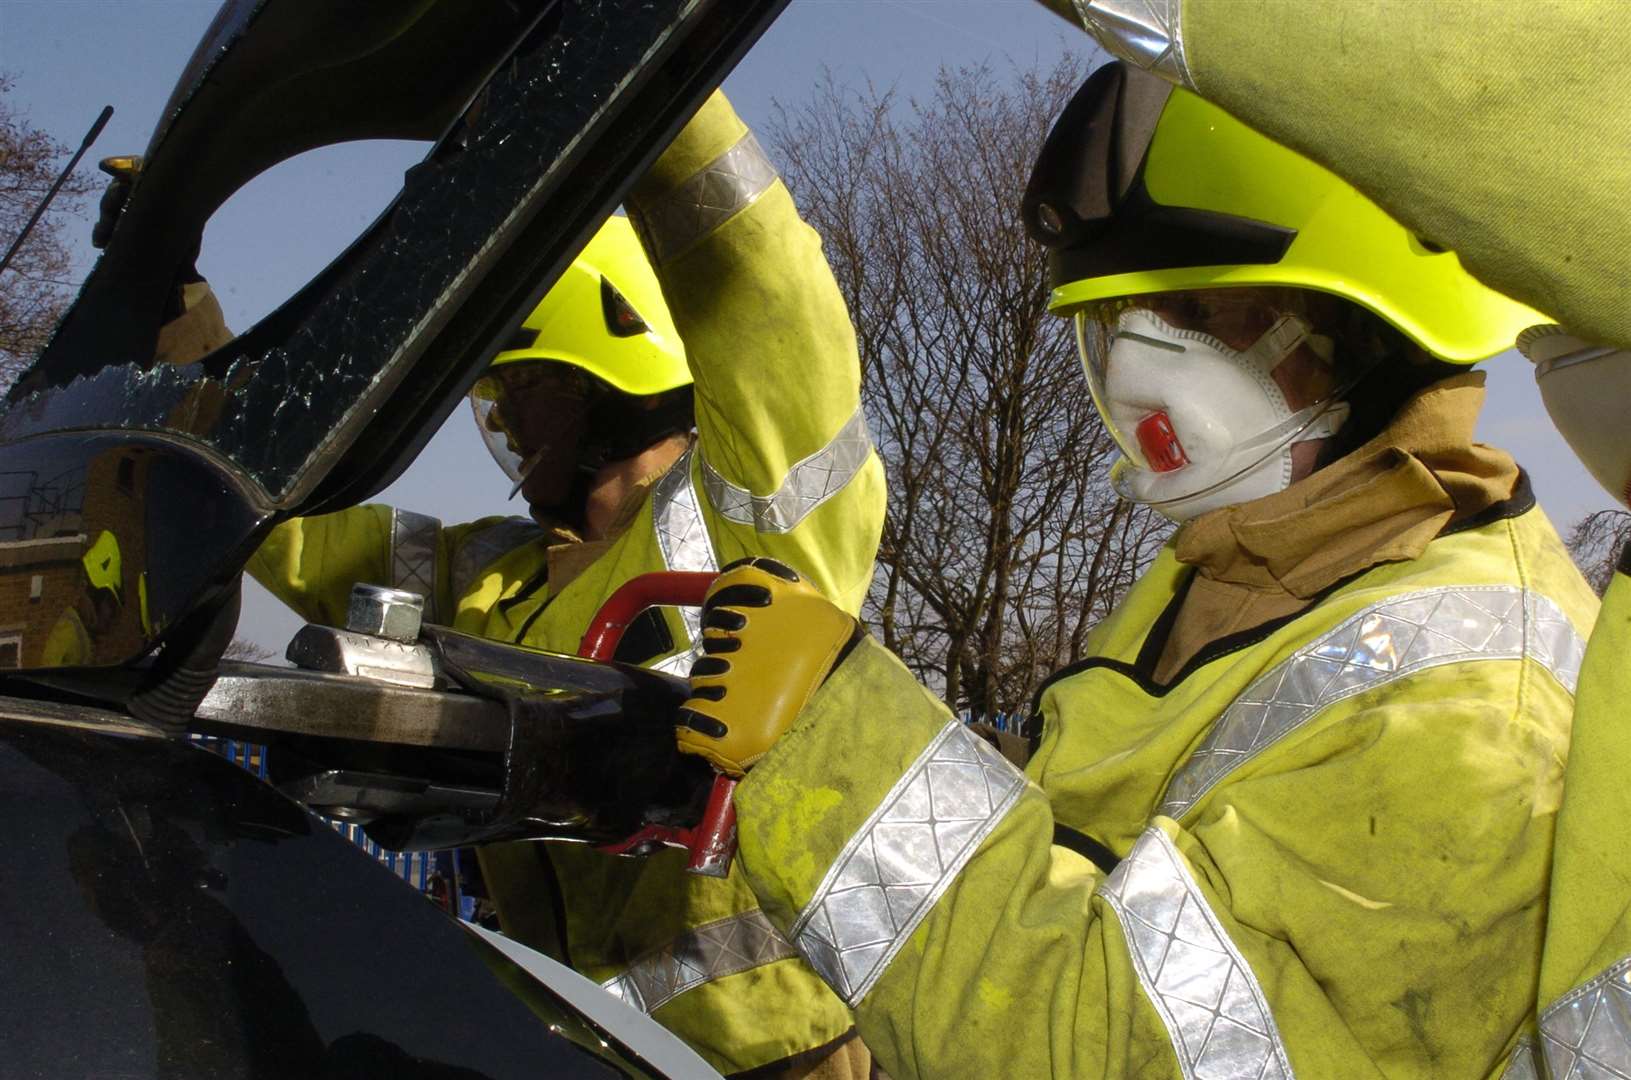 Firefighters use the Jaws of Life to cut open a car. Stock Photo. Picture: Steve Crispe